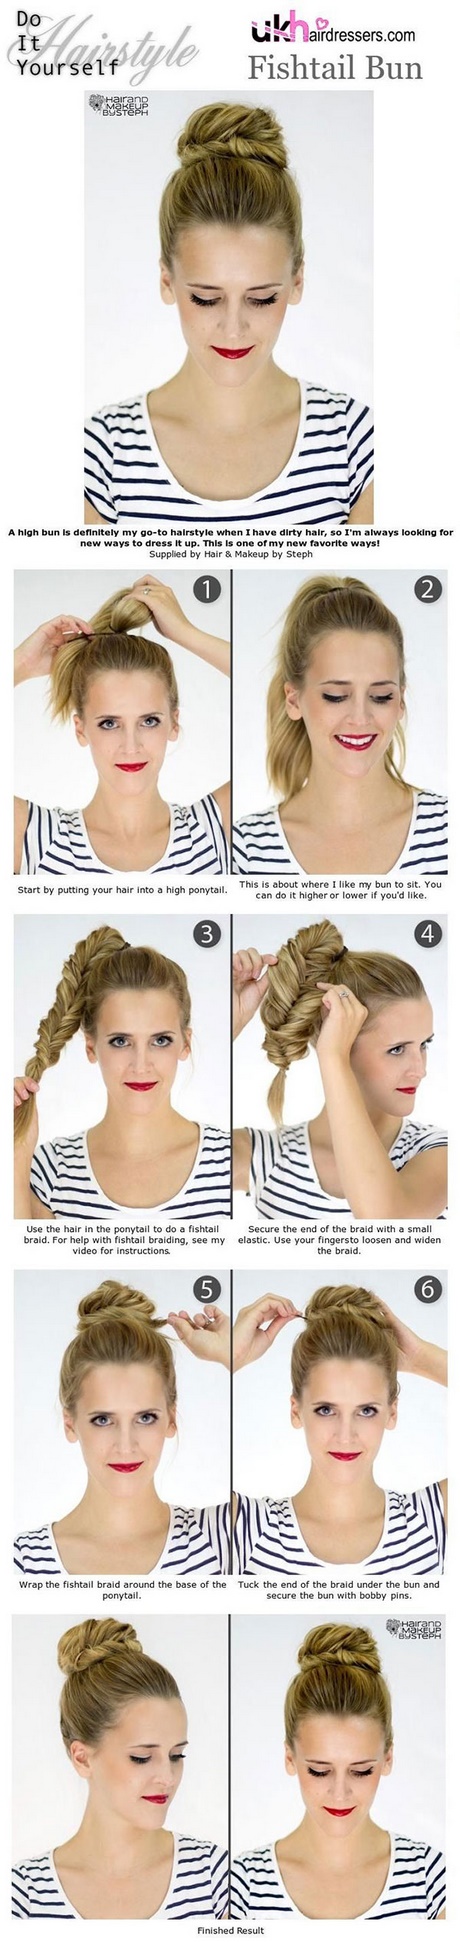 hairstyles-i-can-put-my-picture-in-95_2 Hairstyles i can put my picture in